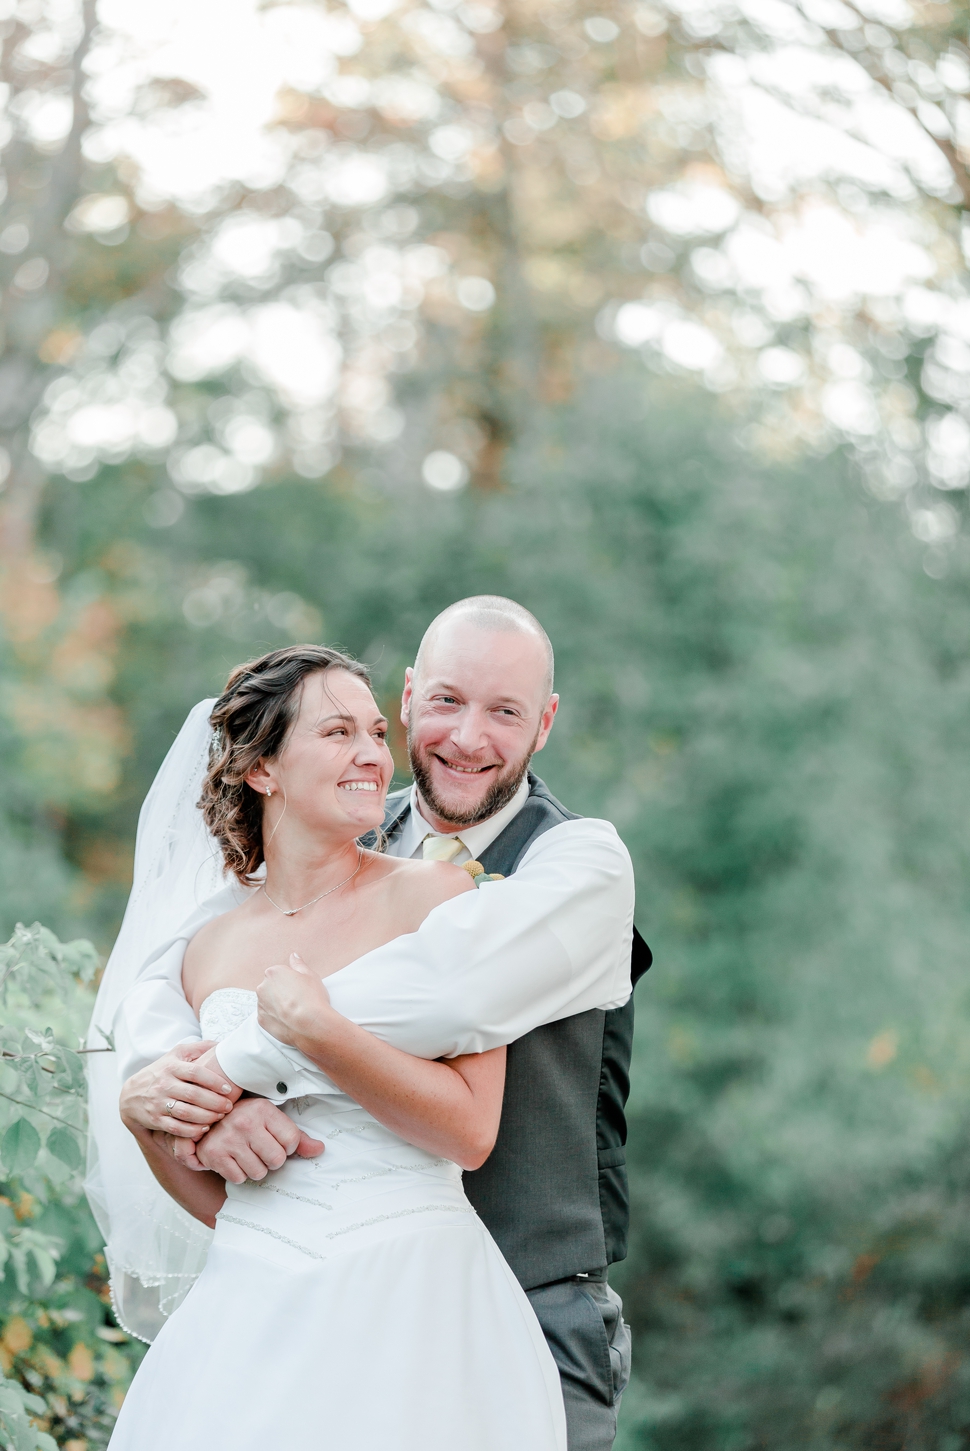 natural portrait of bride and groom laughing together during their fall wedding